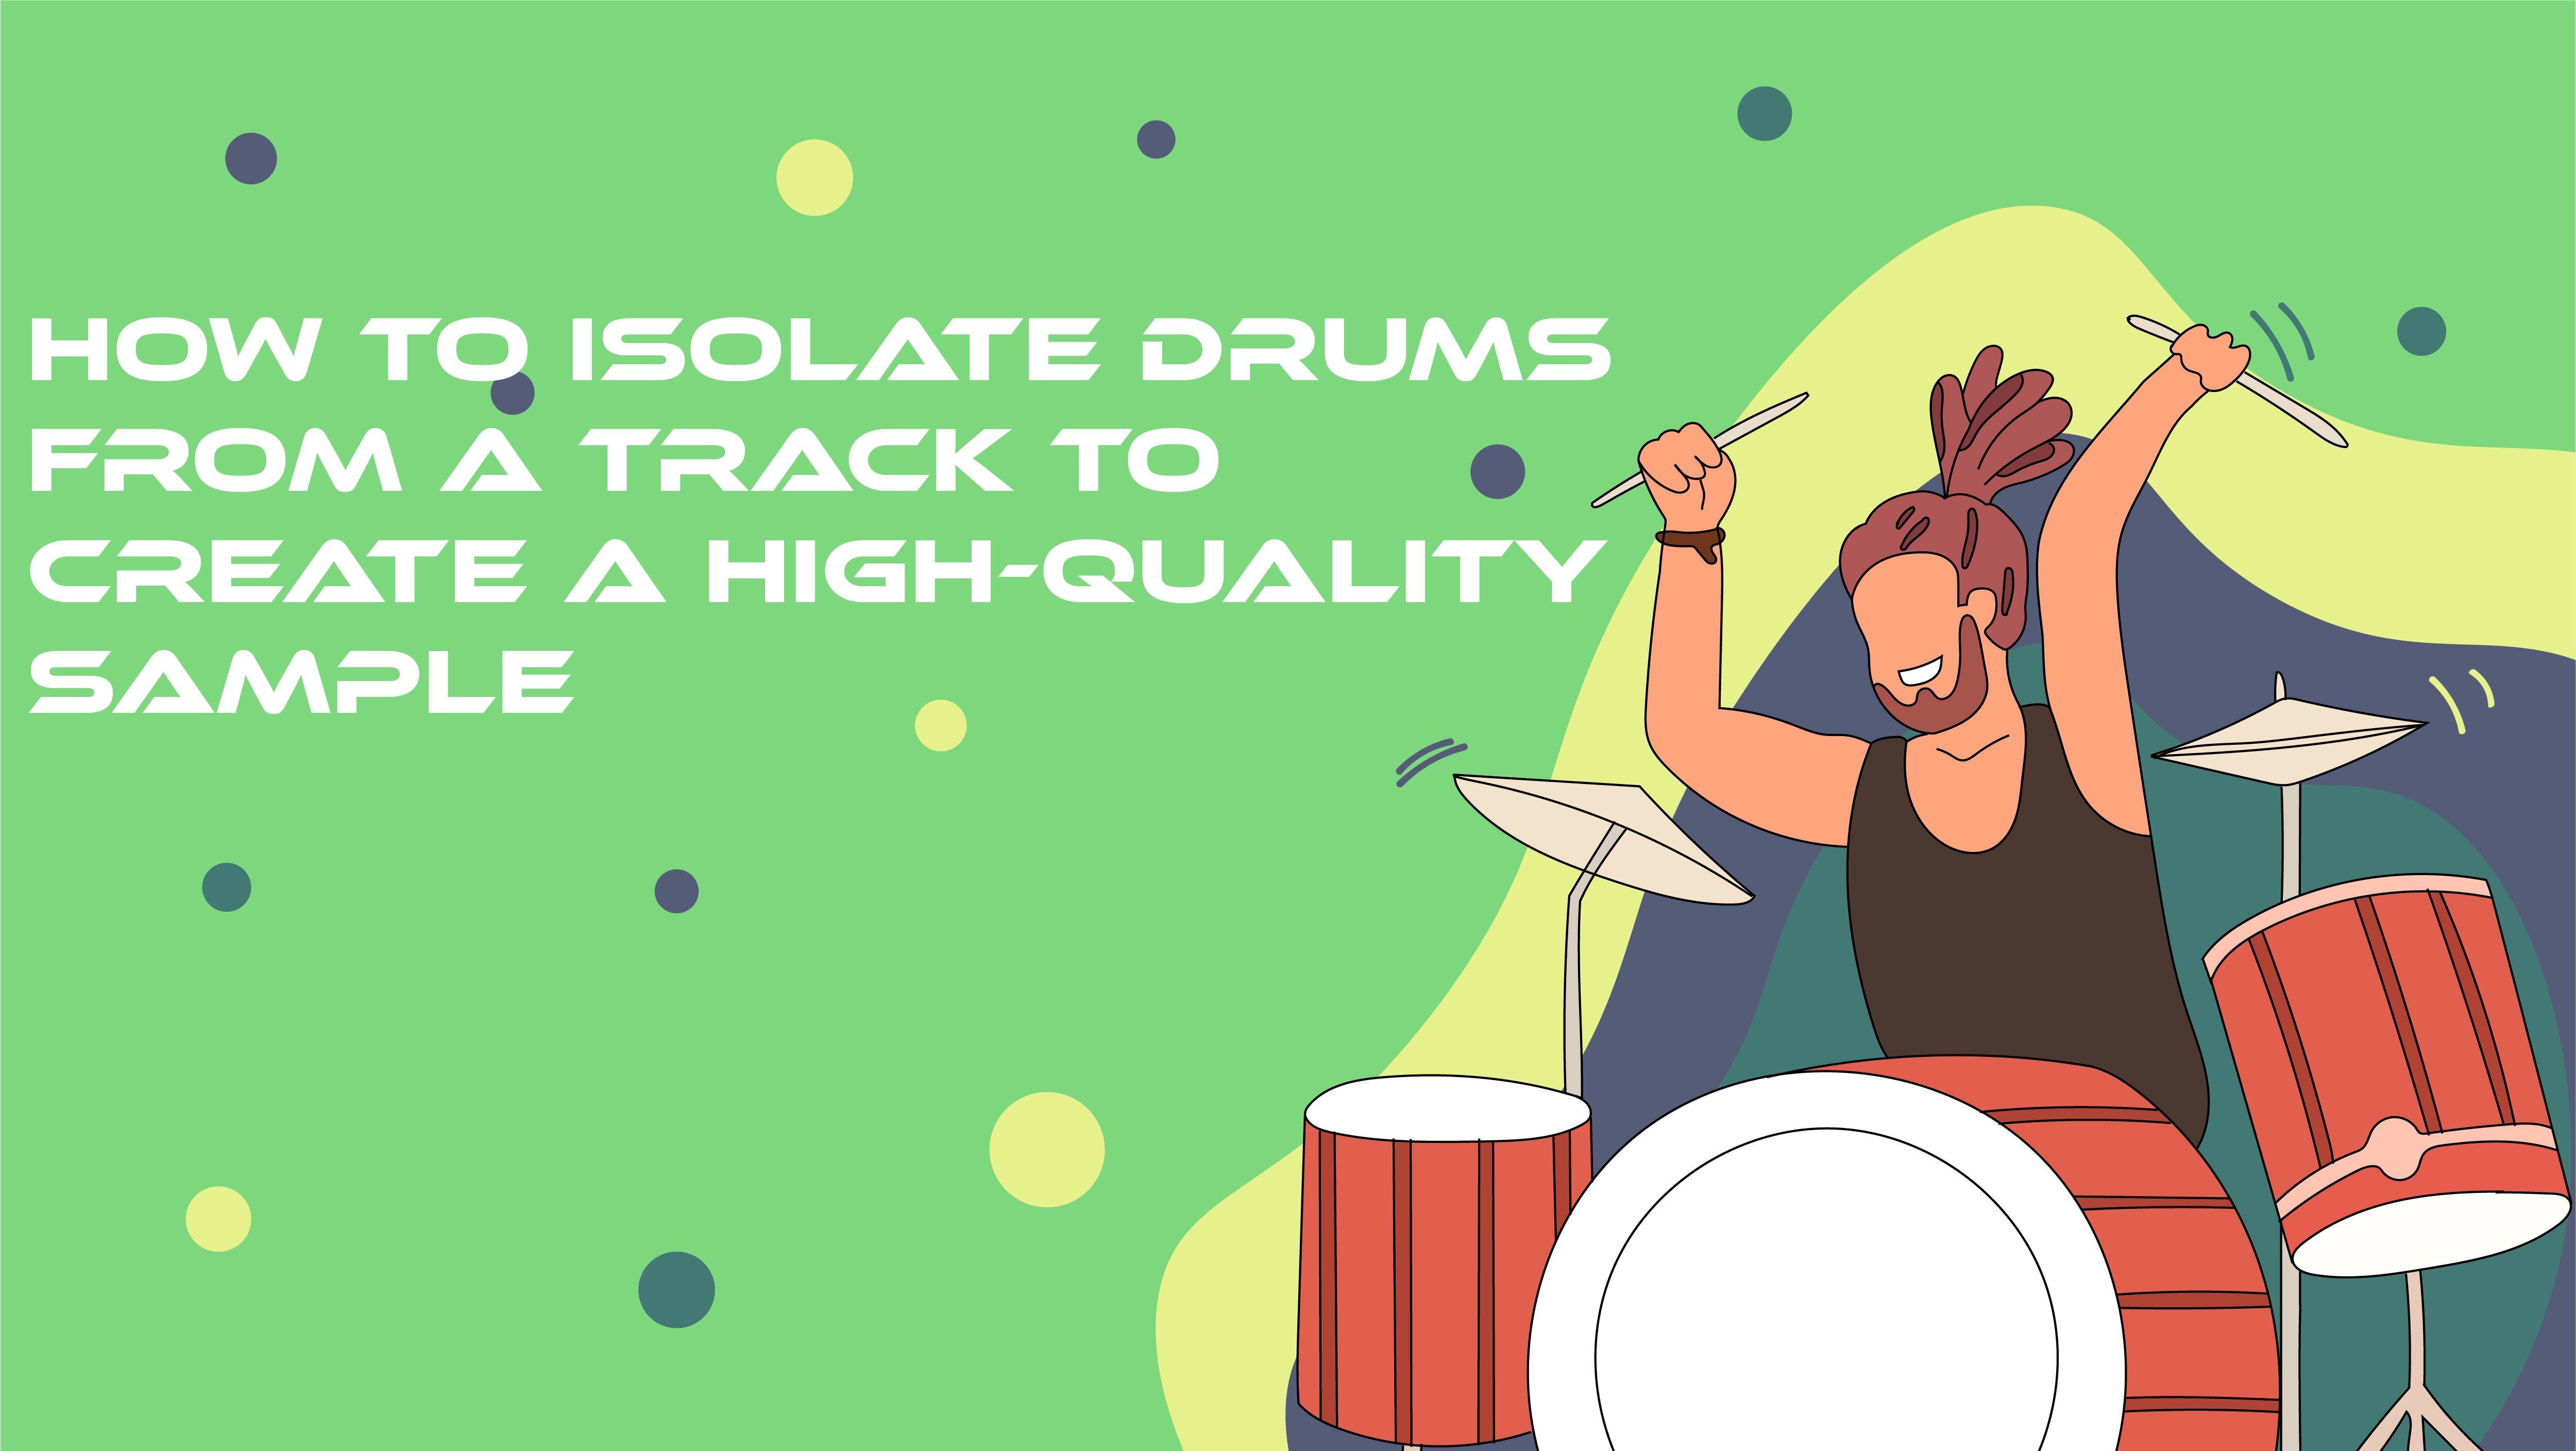 How To Isolate and Separate Drums From an Audio Track to Create a High-Quality Sample